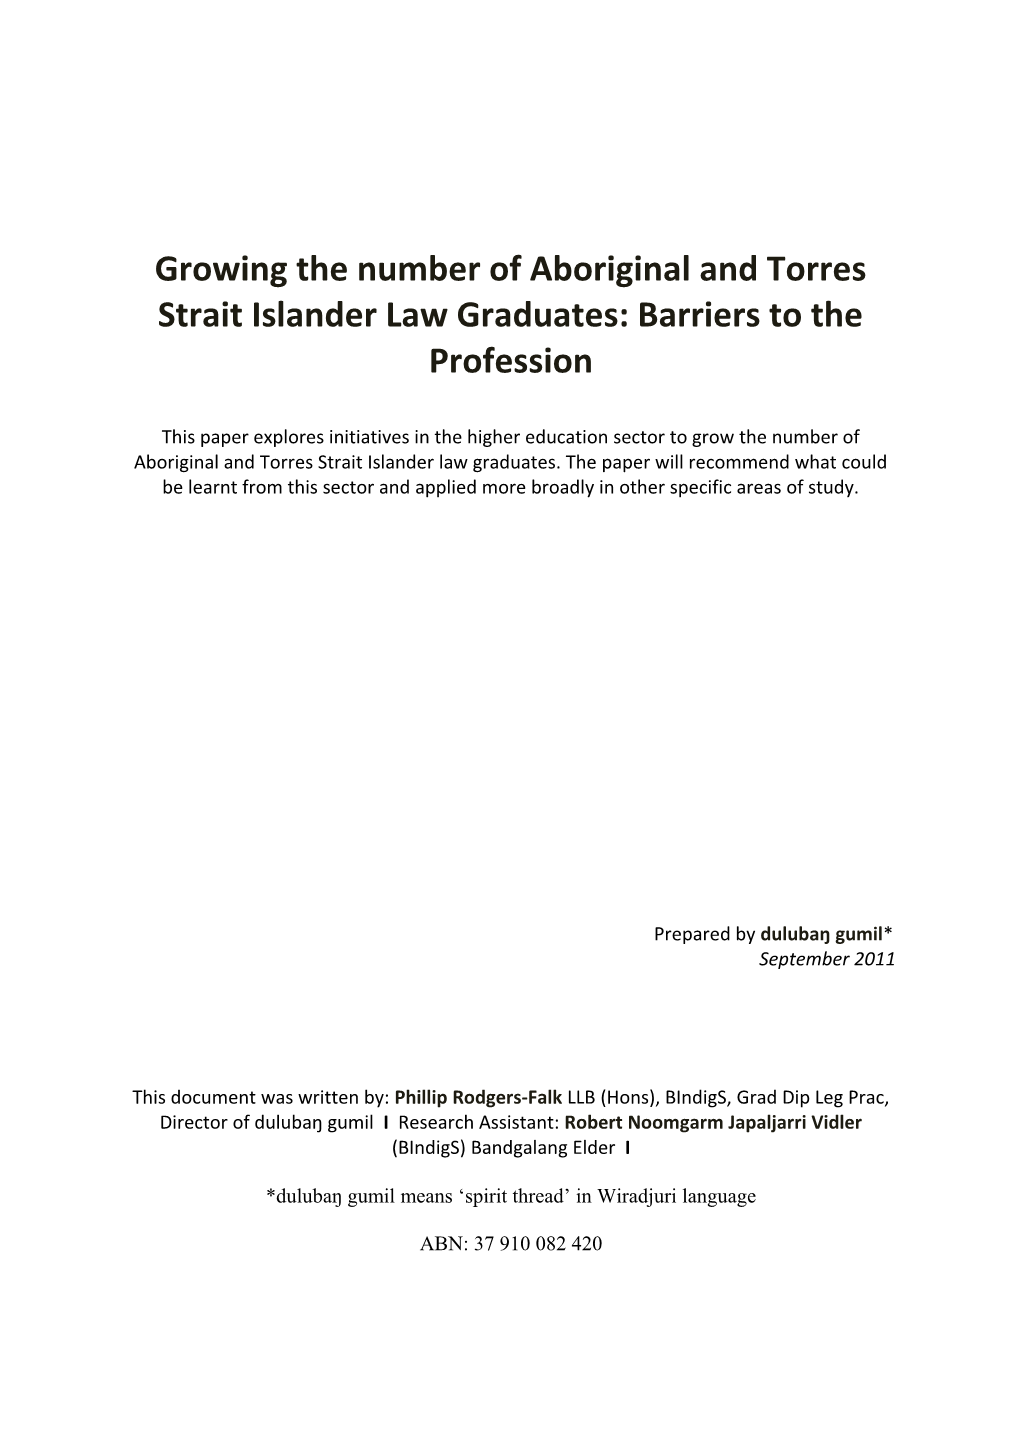 Growing the Number of Aboriginal and Torres Strait Islander Law Graduates - Barriers To